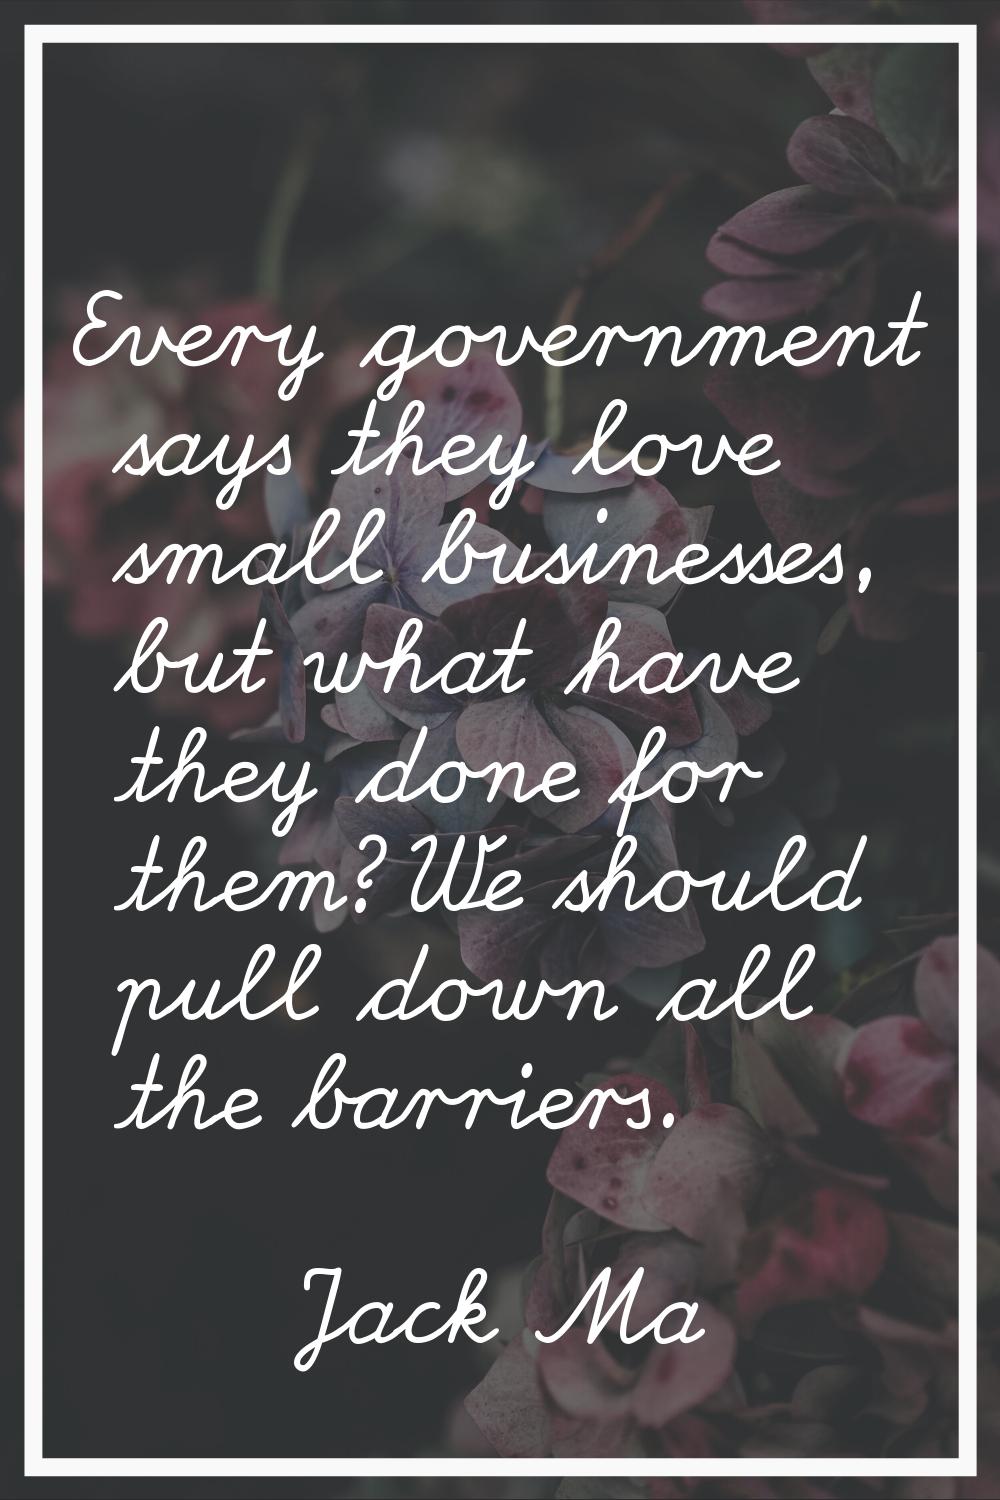 Every government says they love small businesses, but what have they done for them? We should pull 